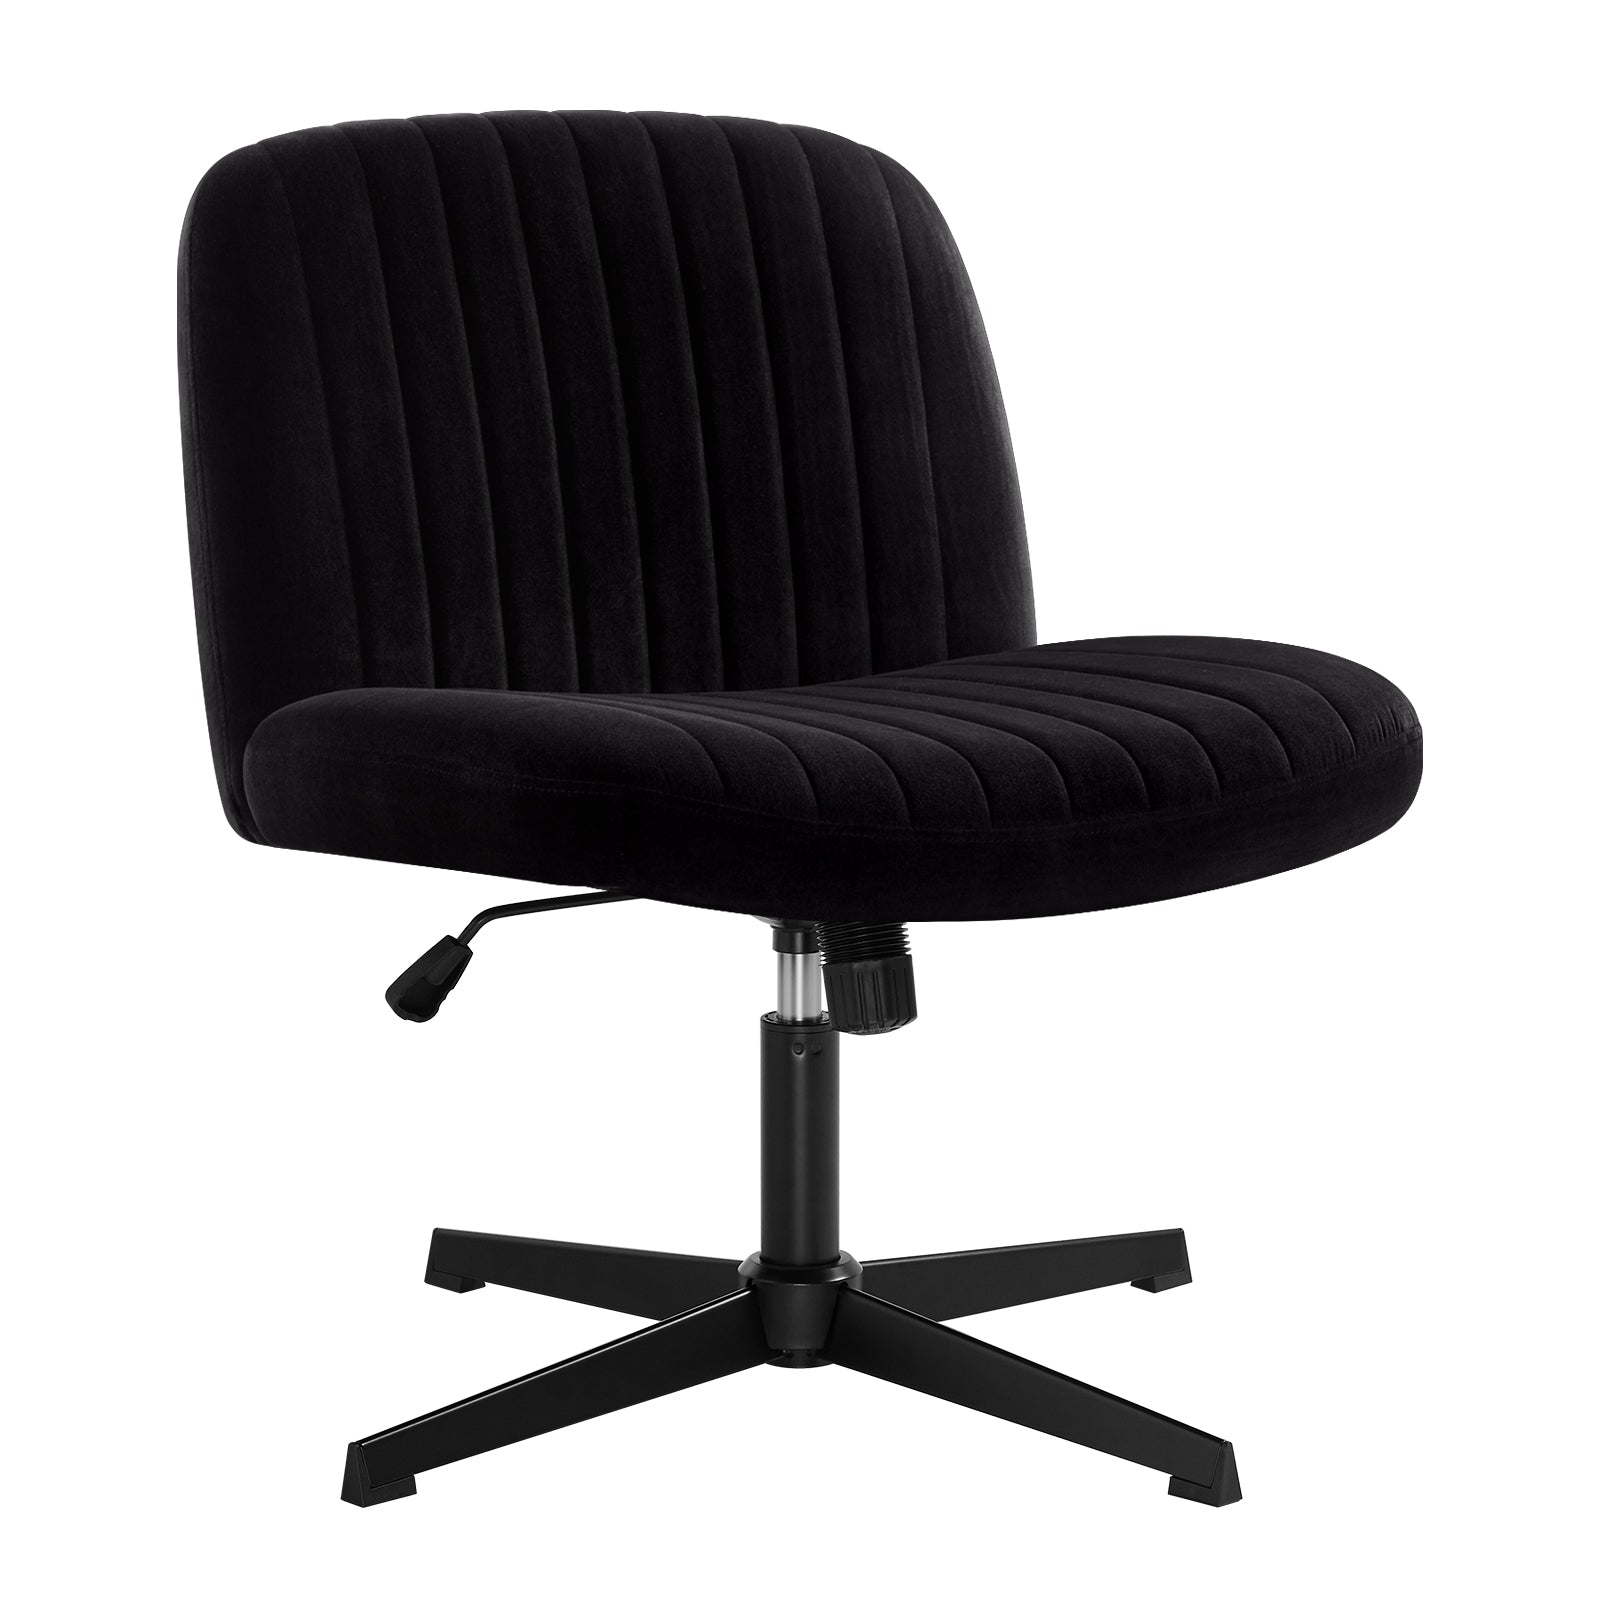 Mukava Armless Office Chair Desk Chair No Wheels, Fabric Padded